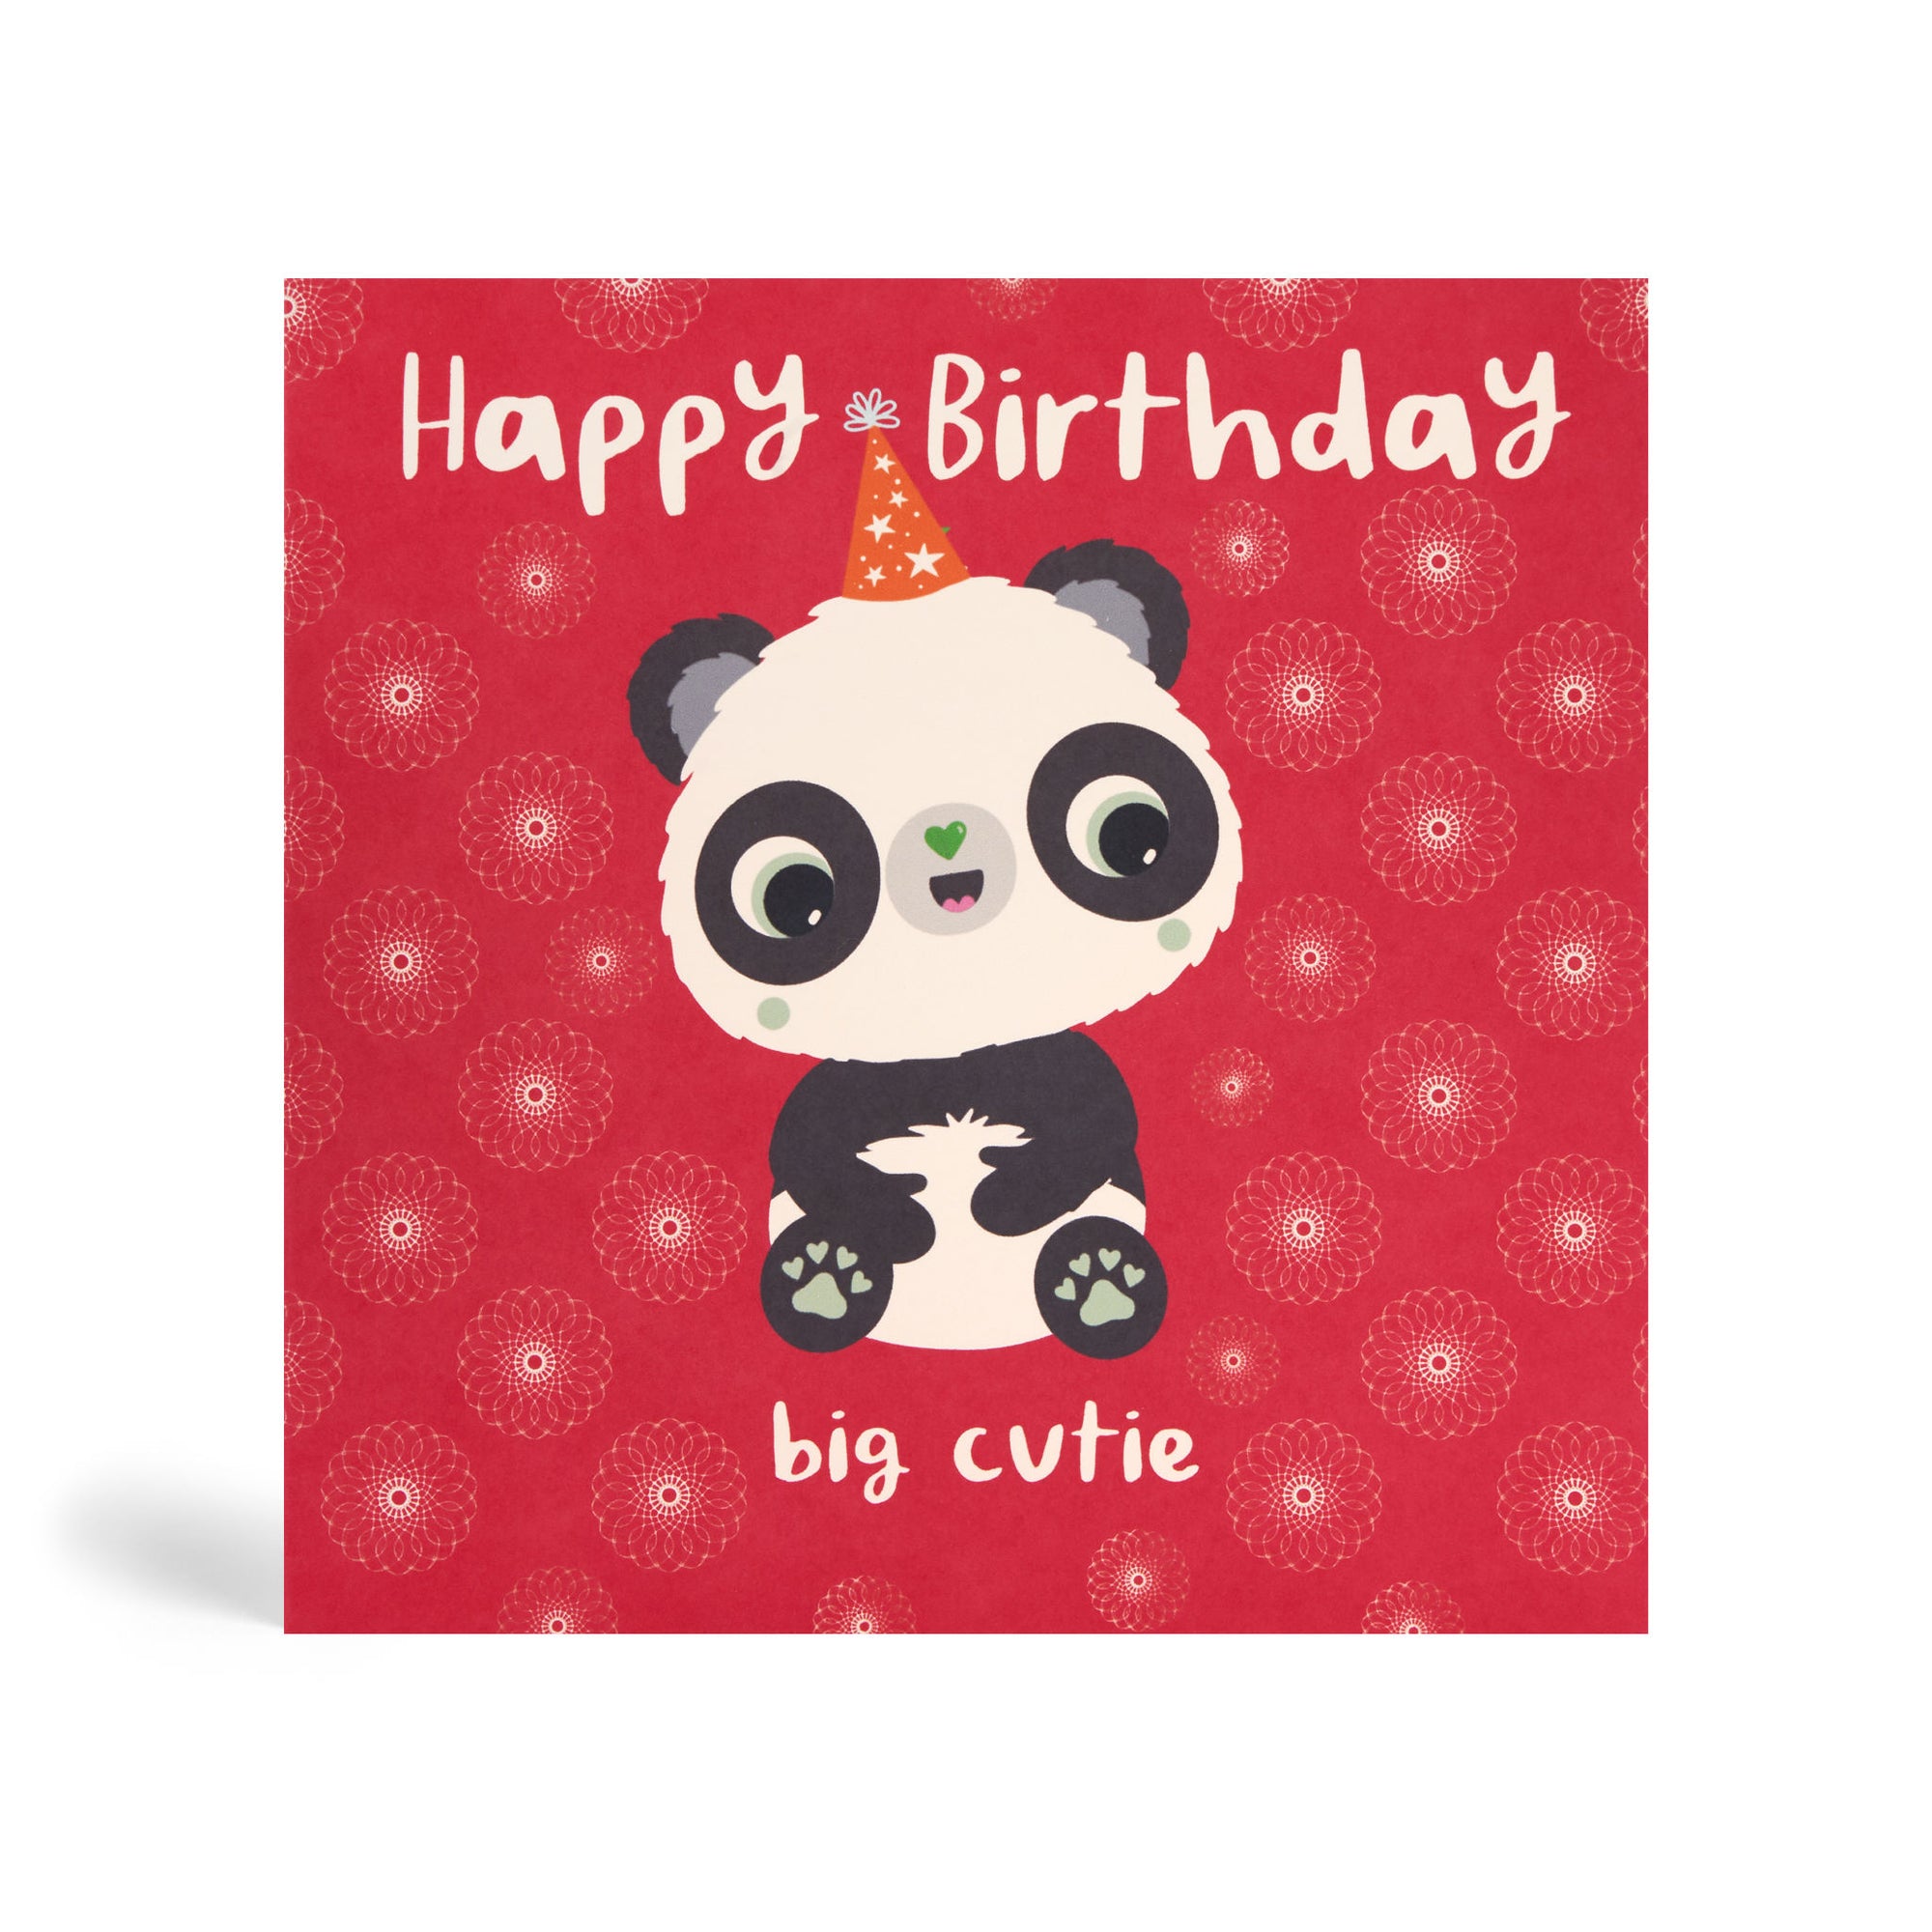 Red background 150mm square eco-friendly, tree free, with panda sitting down and enjoying an environmentally birthday celebration. The card says, Happy Birthday Big Cutie.